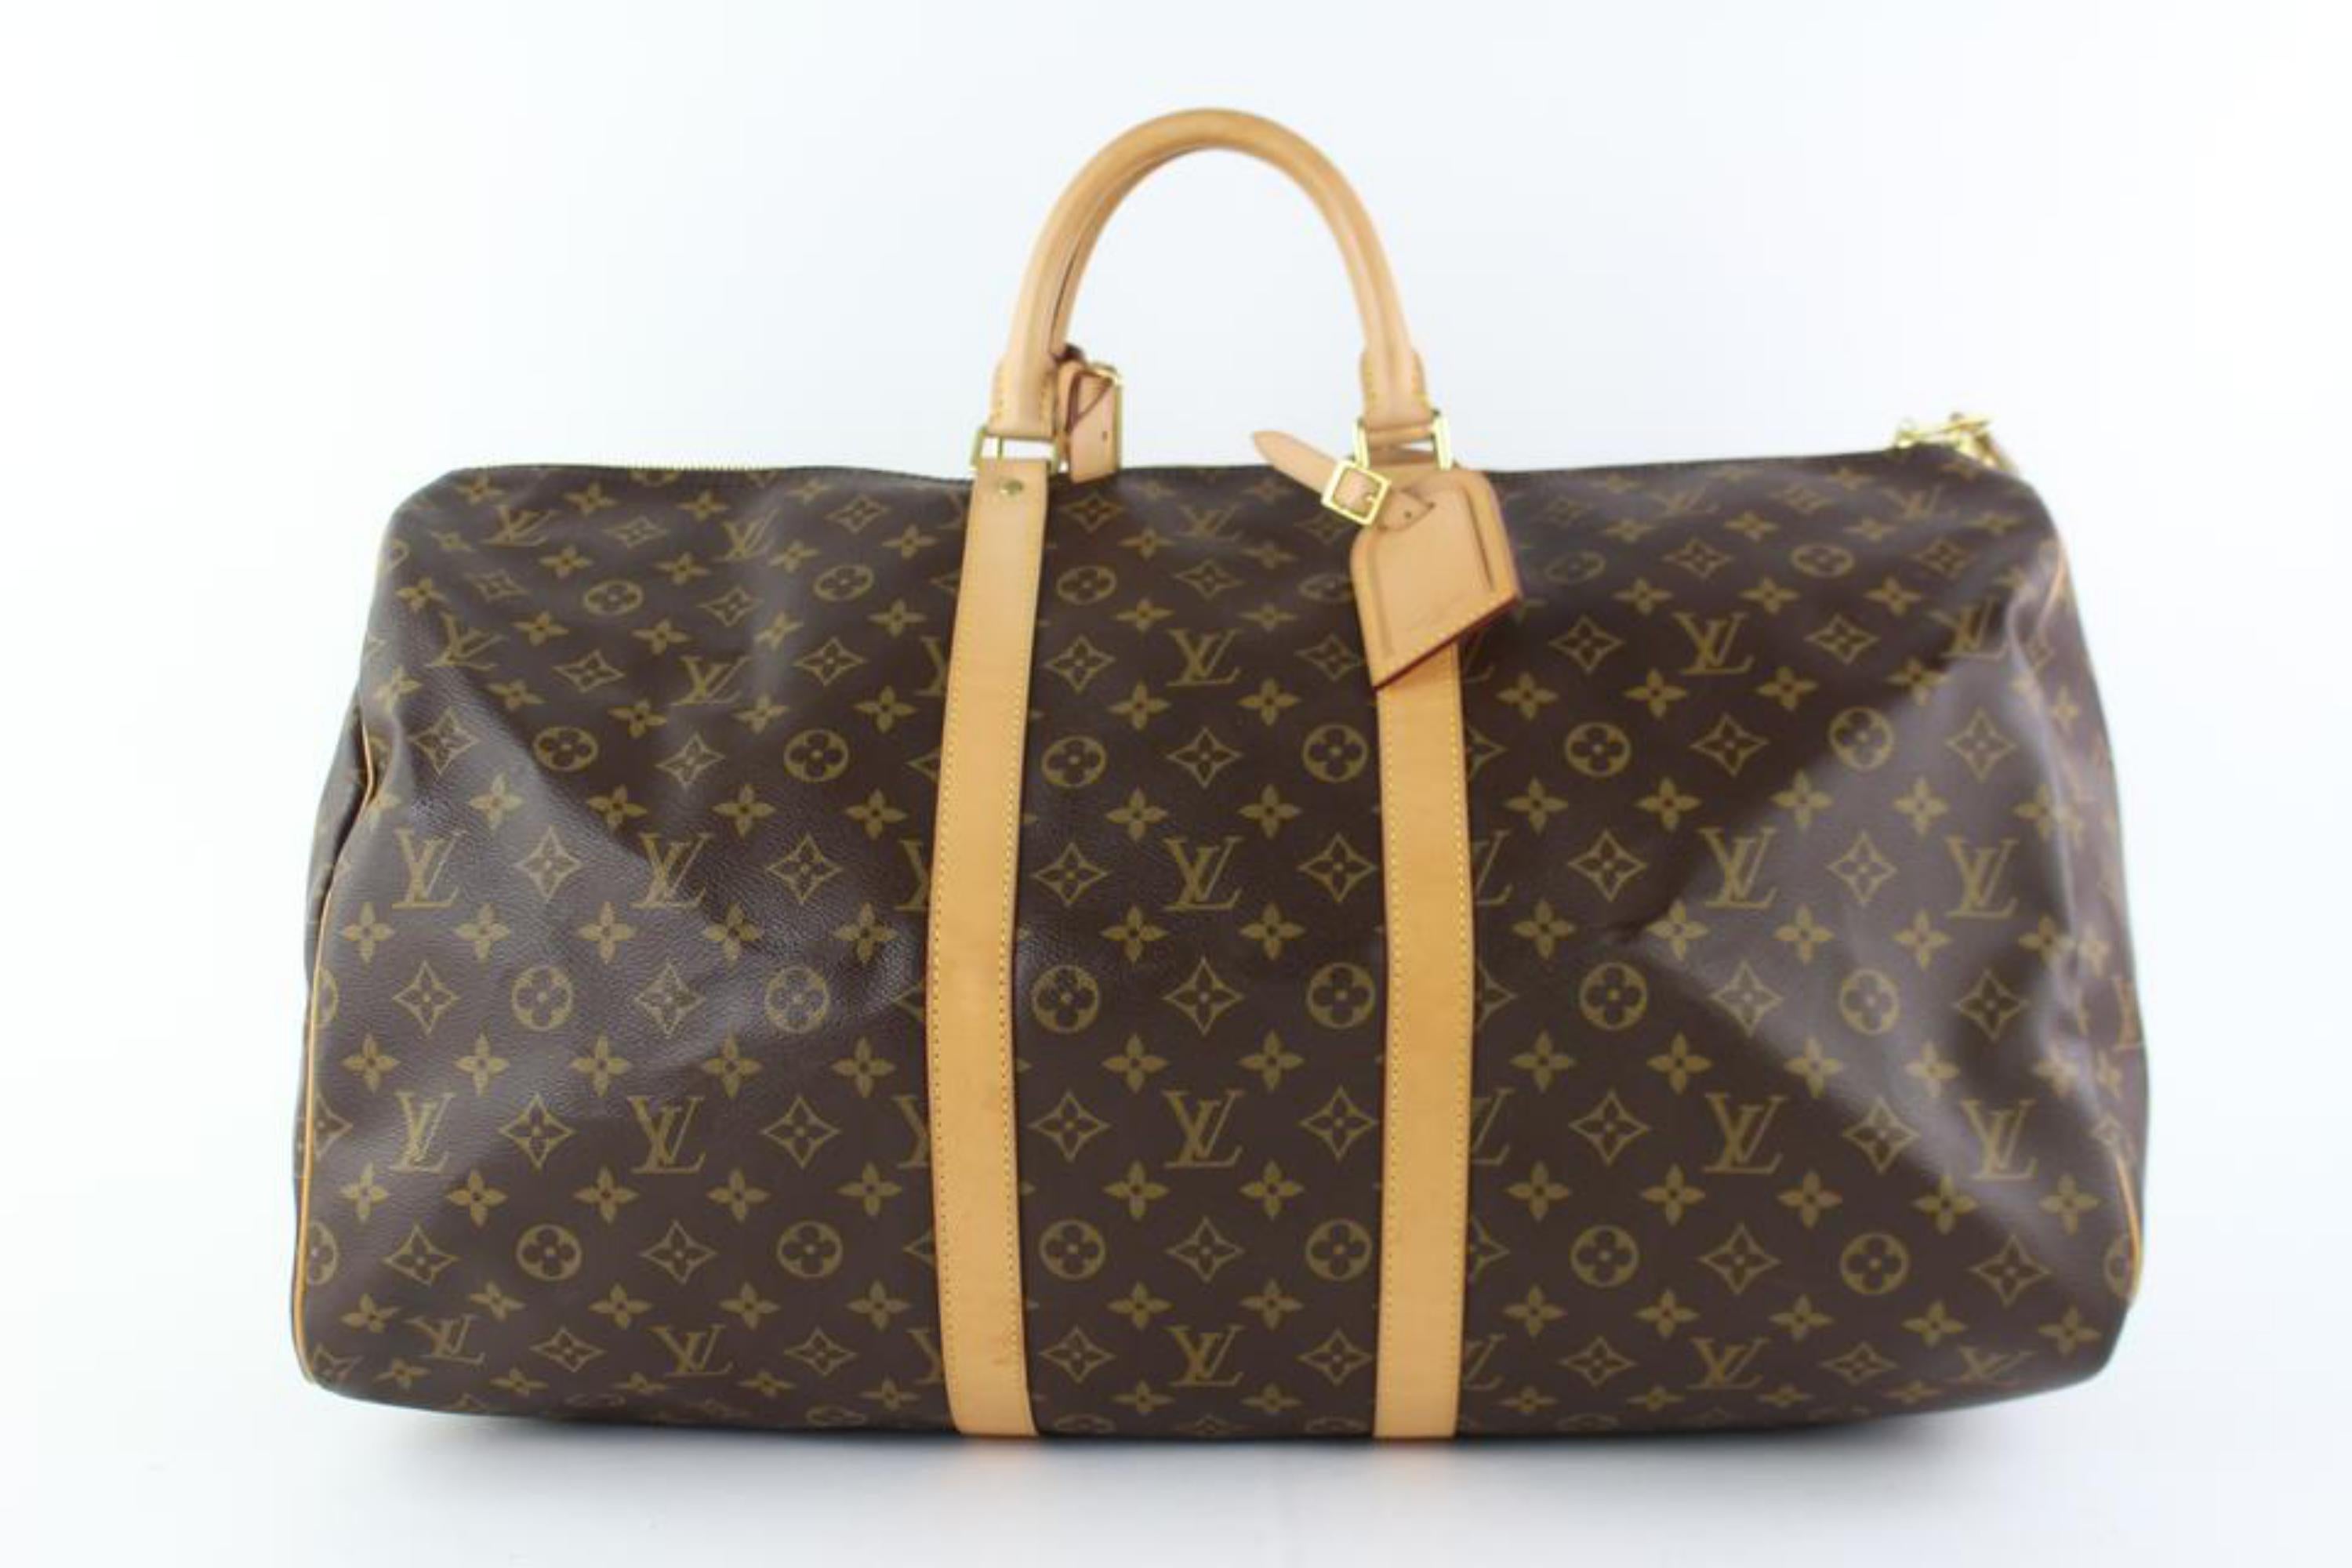 Louis Vuitton Keepall Monogram 50 2lz0928 Brown Coated Canvas Weekend/Travel Bag For Sale 3